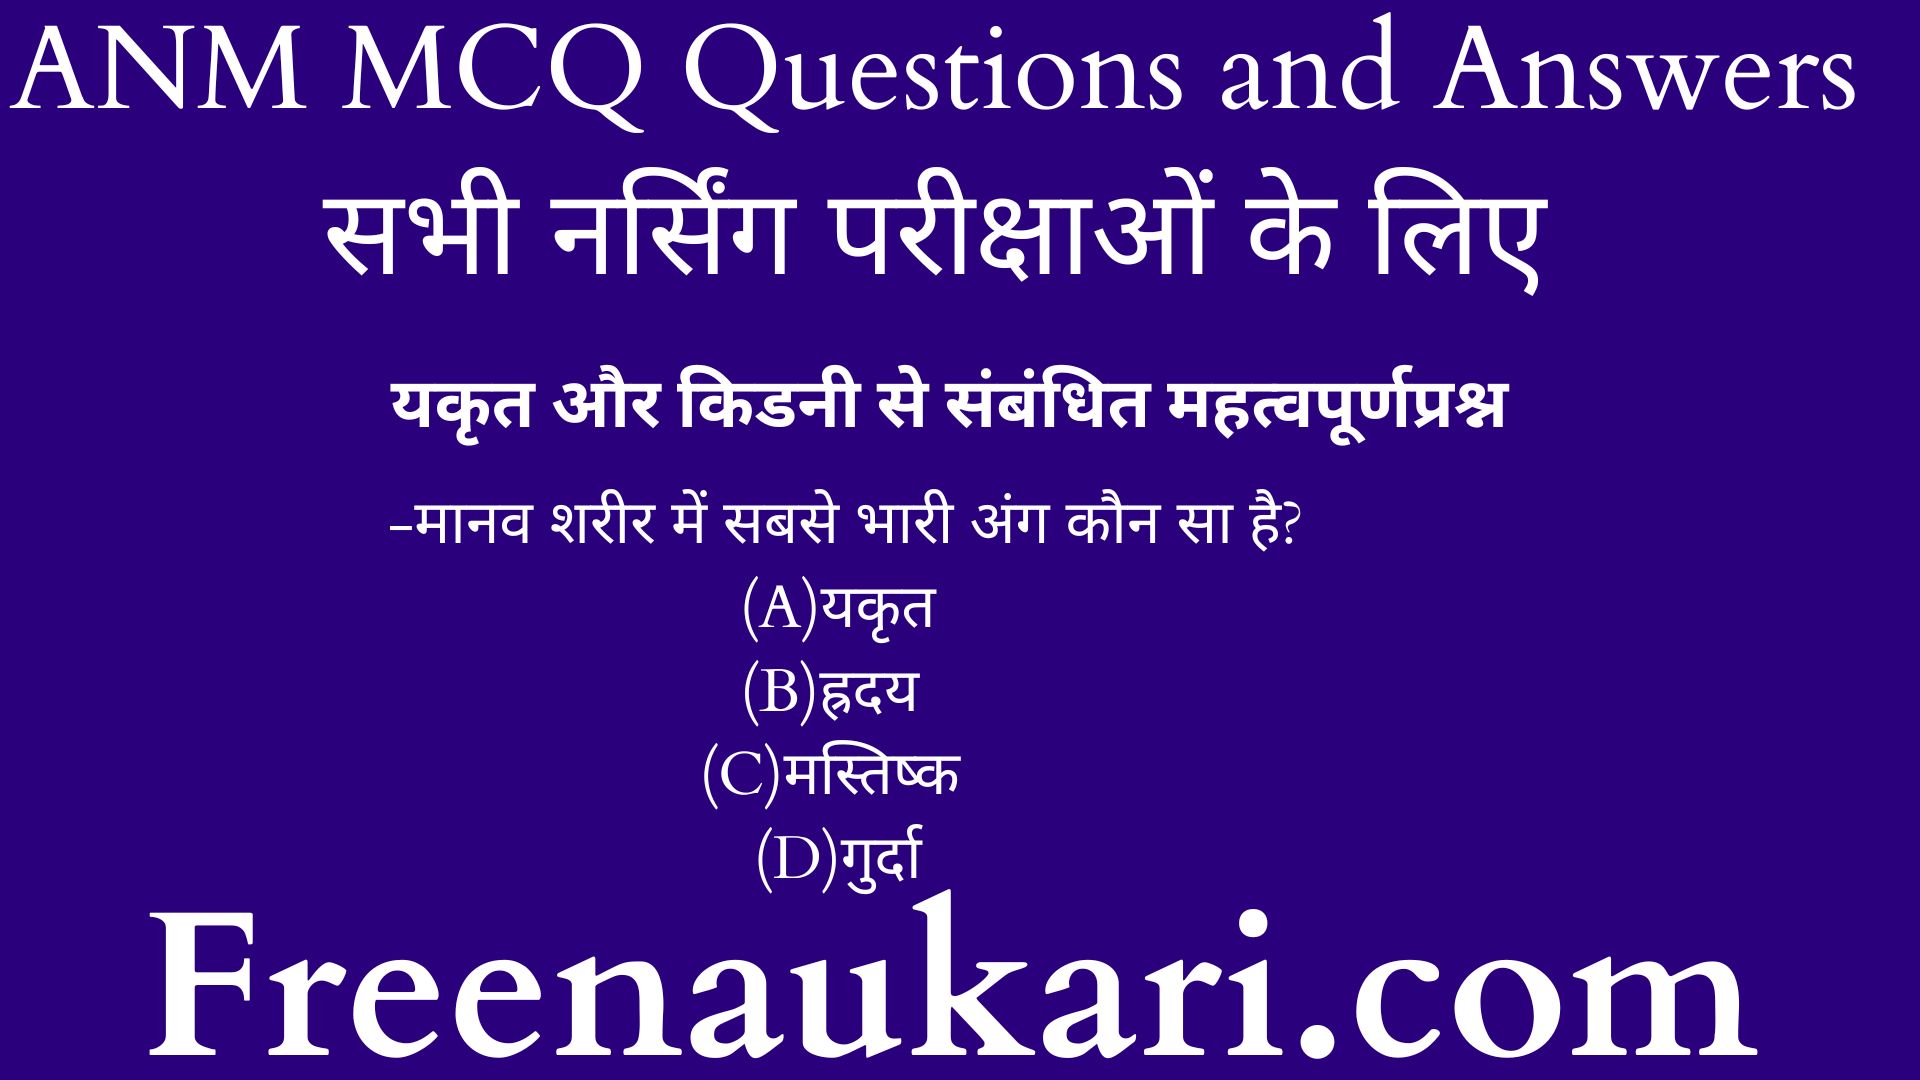 ANM MCQ Questions and Answers